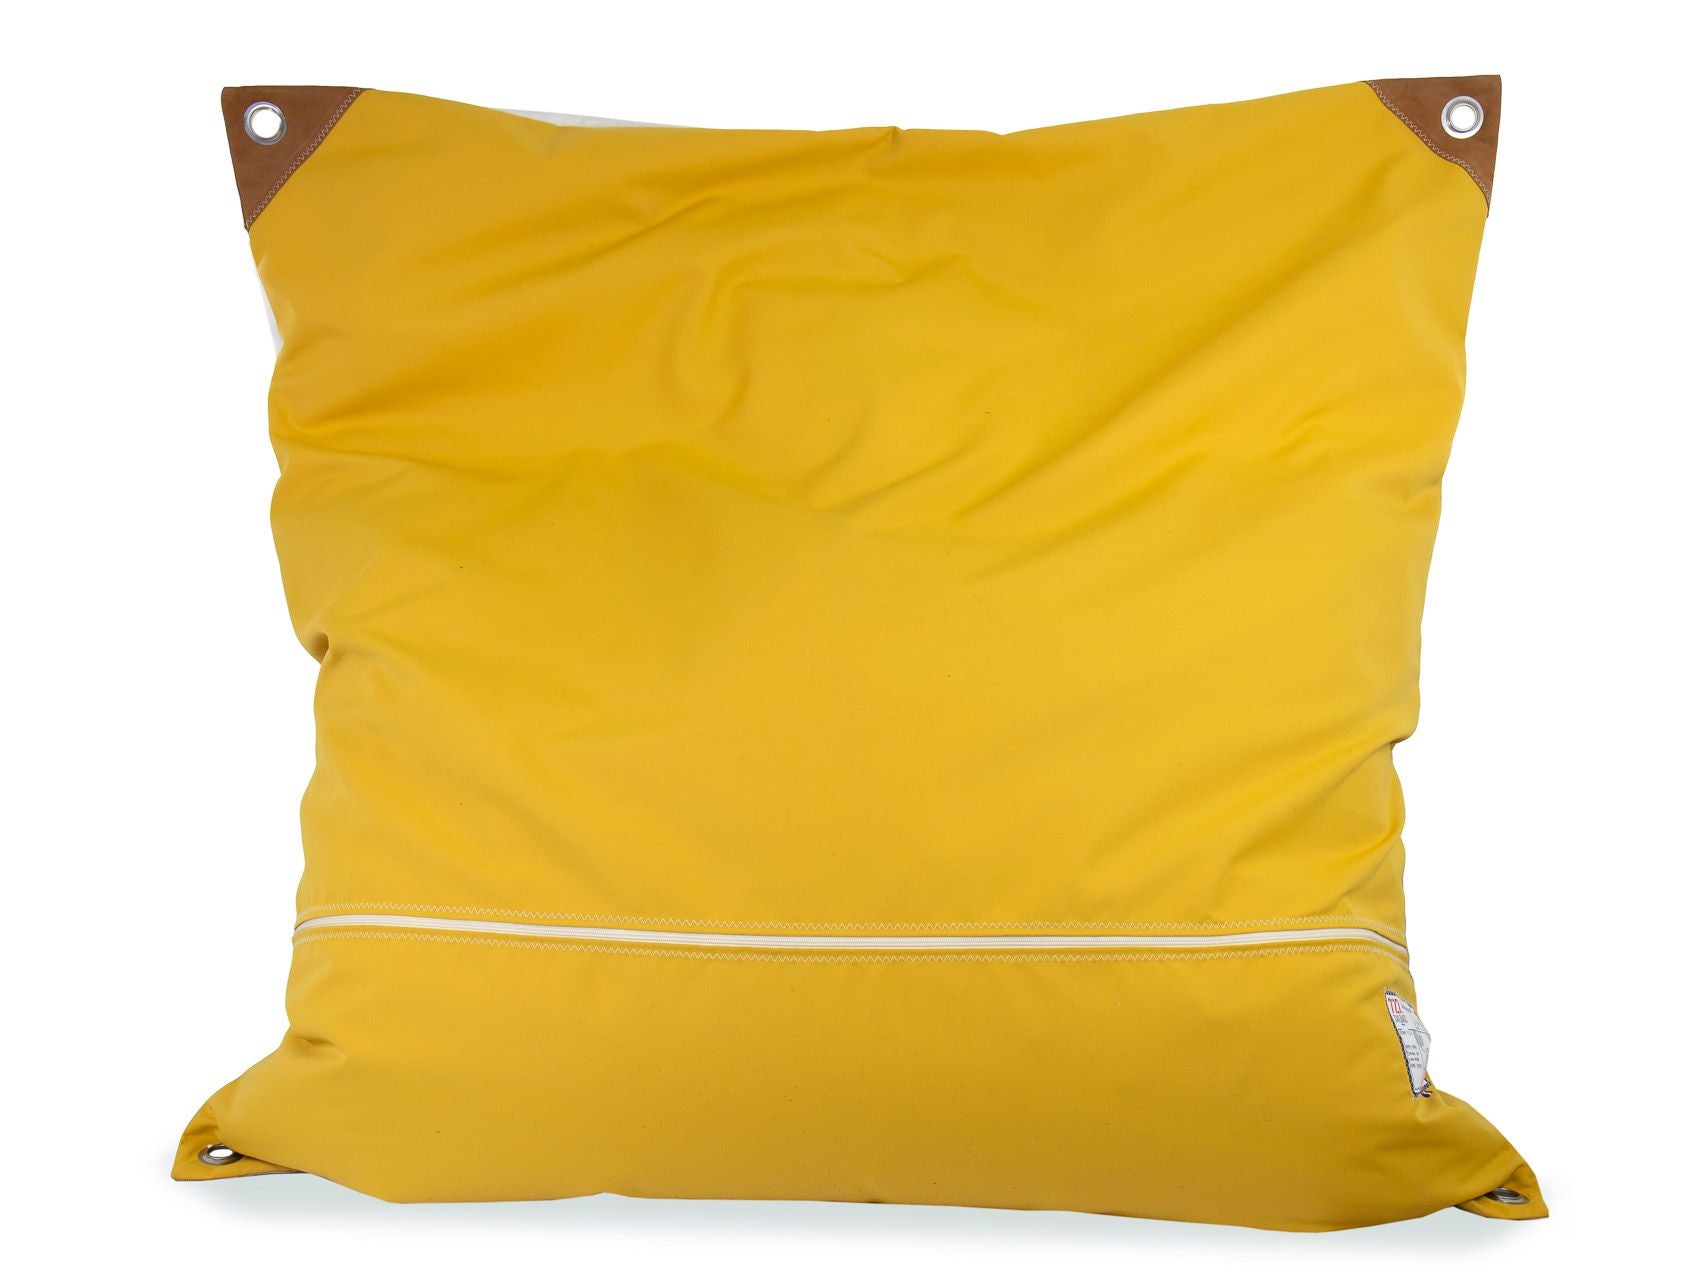 727 Sailbags | Filled Maxi Bean Bag | Sail, Linen & Leather | Natural, White & Yellow | Size 140cm x 140cm | FILLING + AUCKLAND METRO DELIVERY INCLUDED IN PRICE